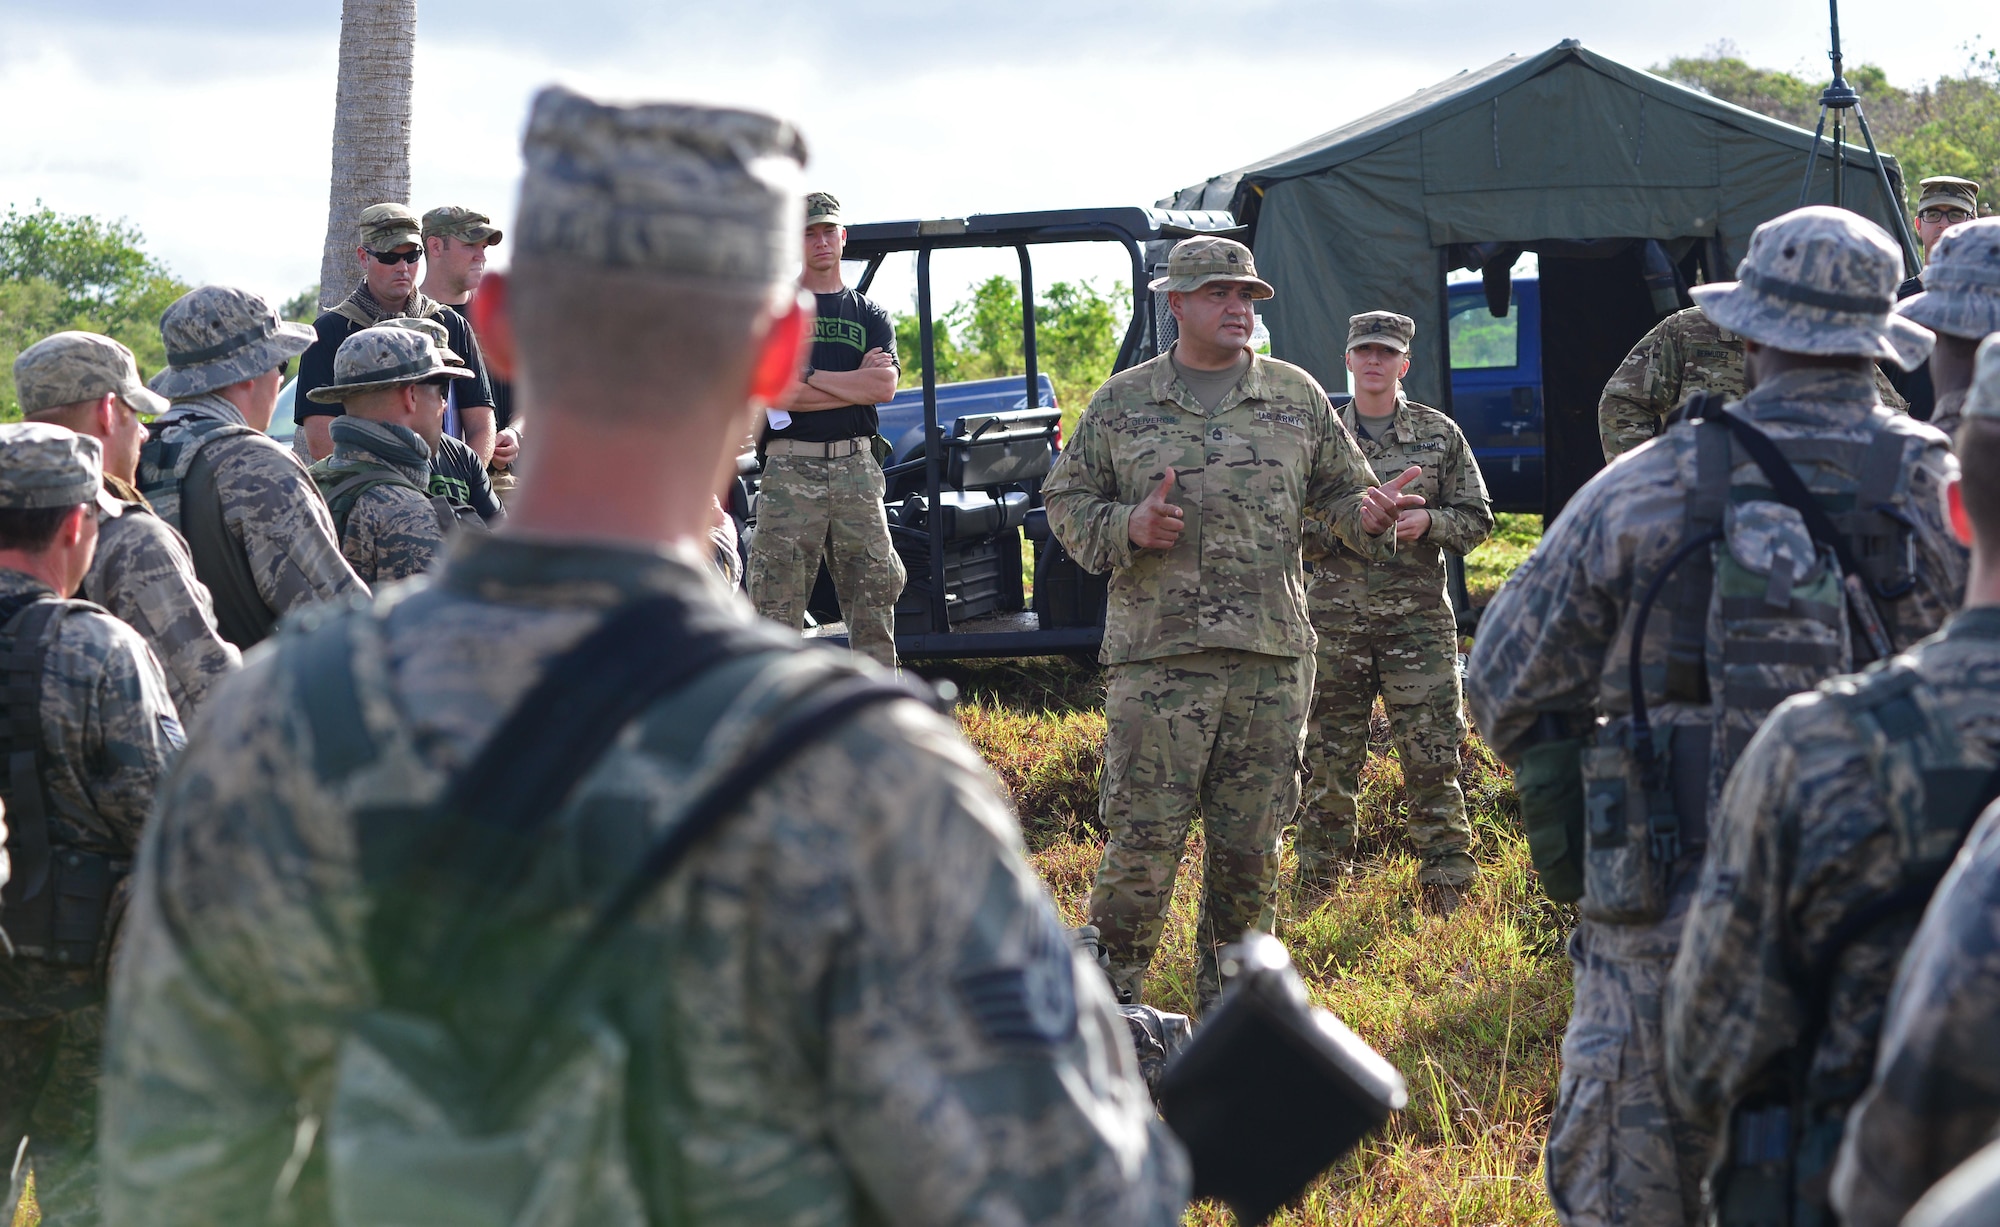 U.S. Army Sgt. 1st Class Jaime Oliveros, 25th Infantry Division’s Lightning Academy Jungle Operations Training Center instructor, informs students of their mission objectives June 16, 2016, at Andersen Air Force Base South, Guam. From June 15-21, instructors from the U.S. Army 25th Infantry Division’s Lightning Academy Jungle Operations Training Center, in Schofield Barracks, Hawaii, travelled to Guam to teach more than 30 Airmen and Soldiers the fundamentals of fighting and surviving in jungles with support from cadre members of the 736th Security Forces Squadron. (U.S. Air Force photo by Senior Airman Joshua Smoot)